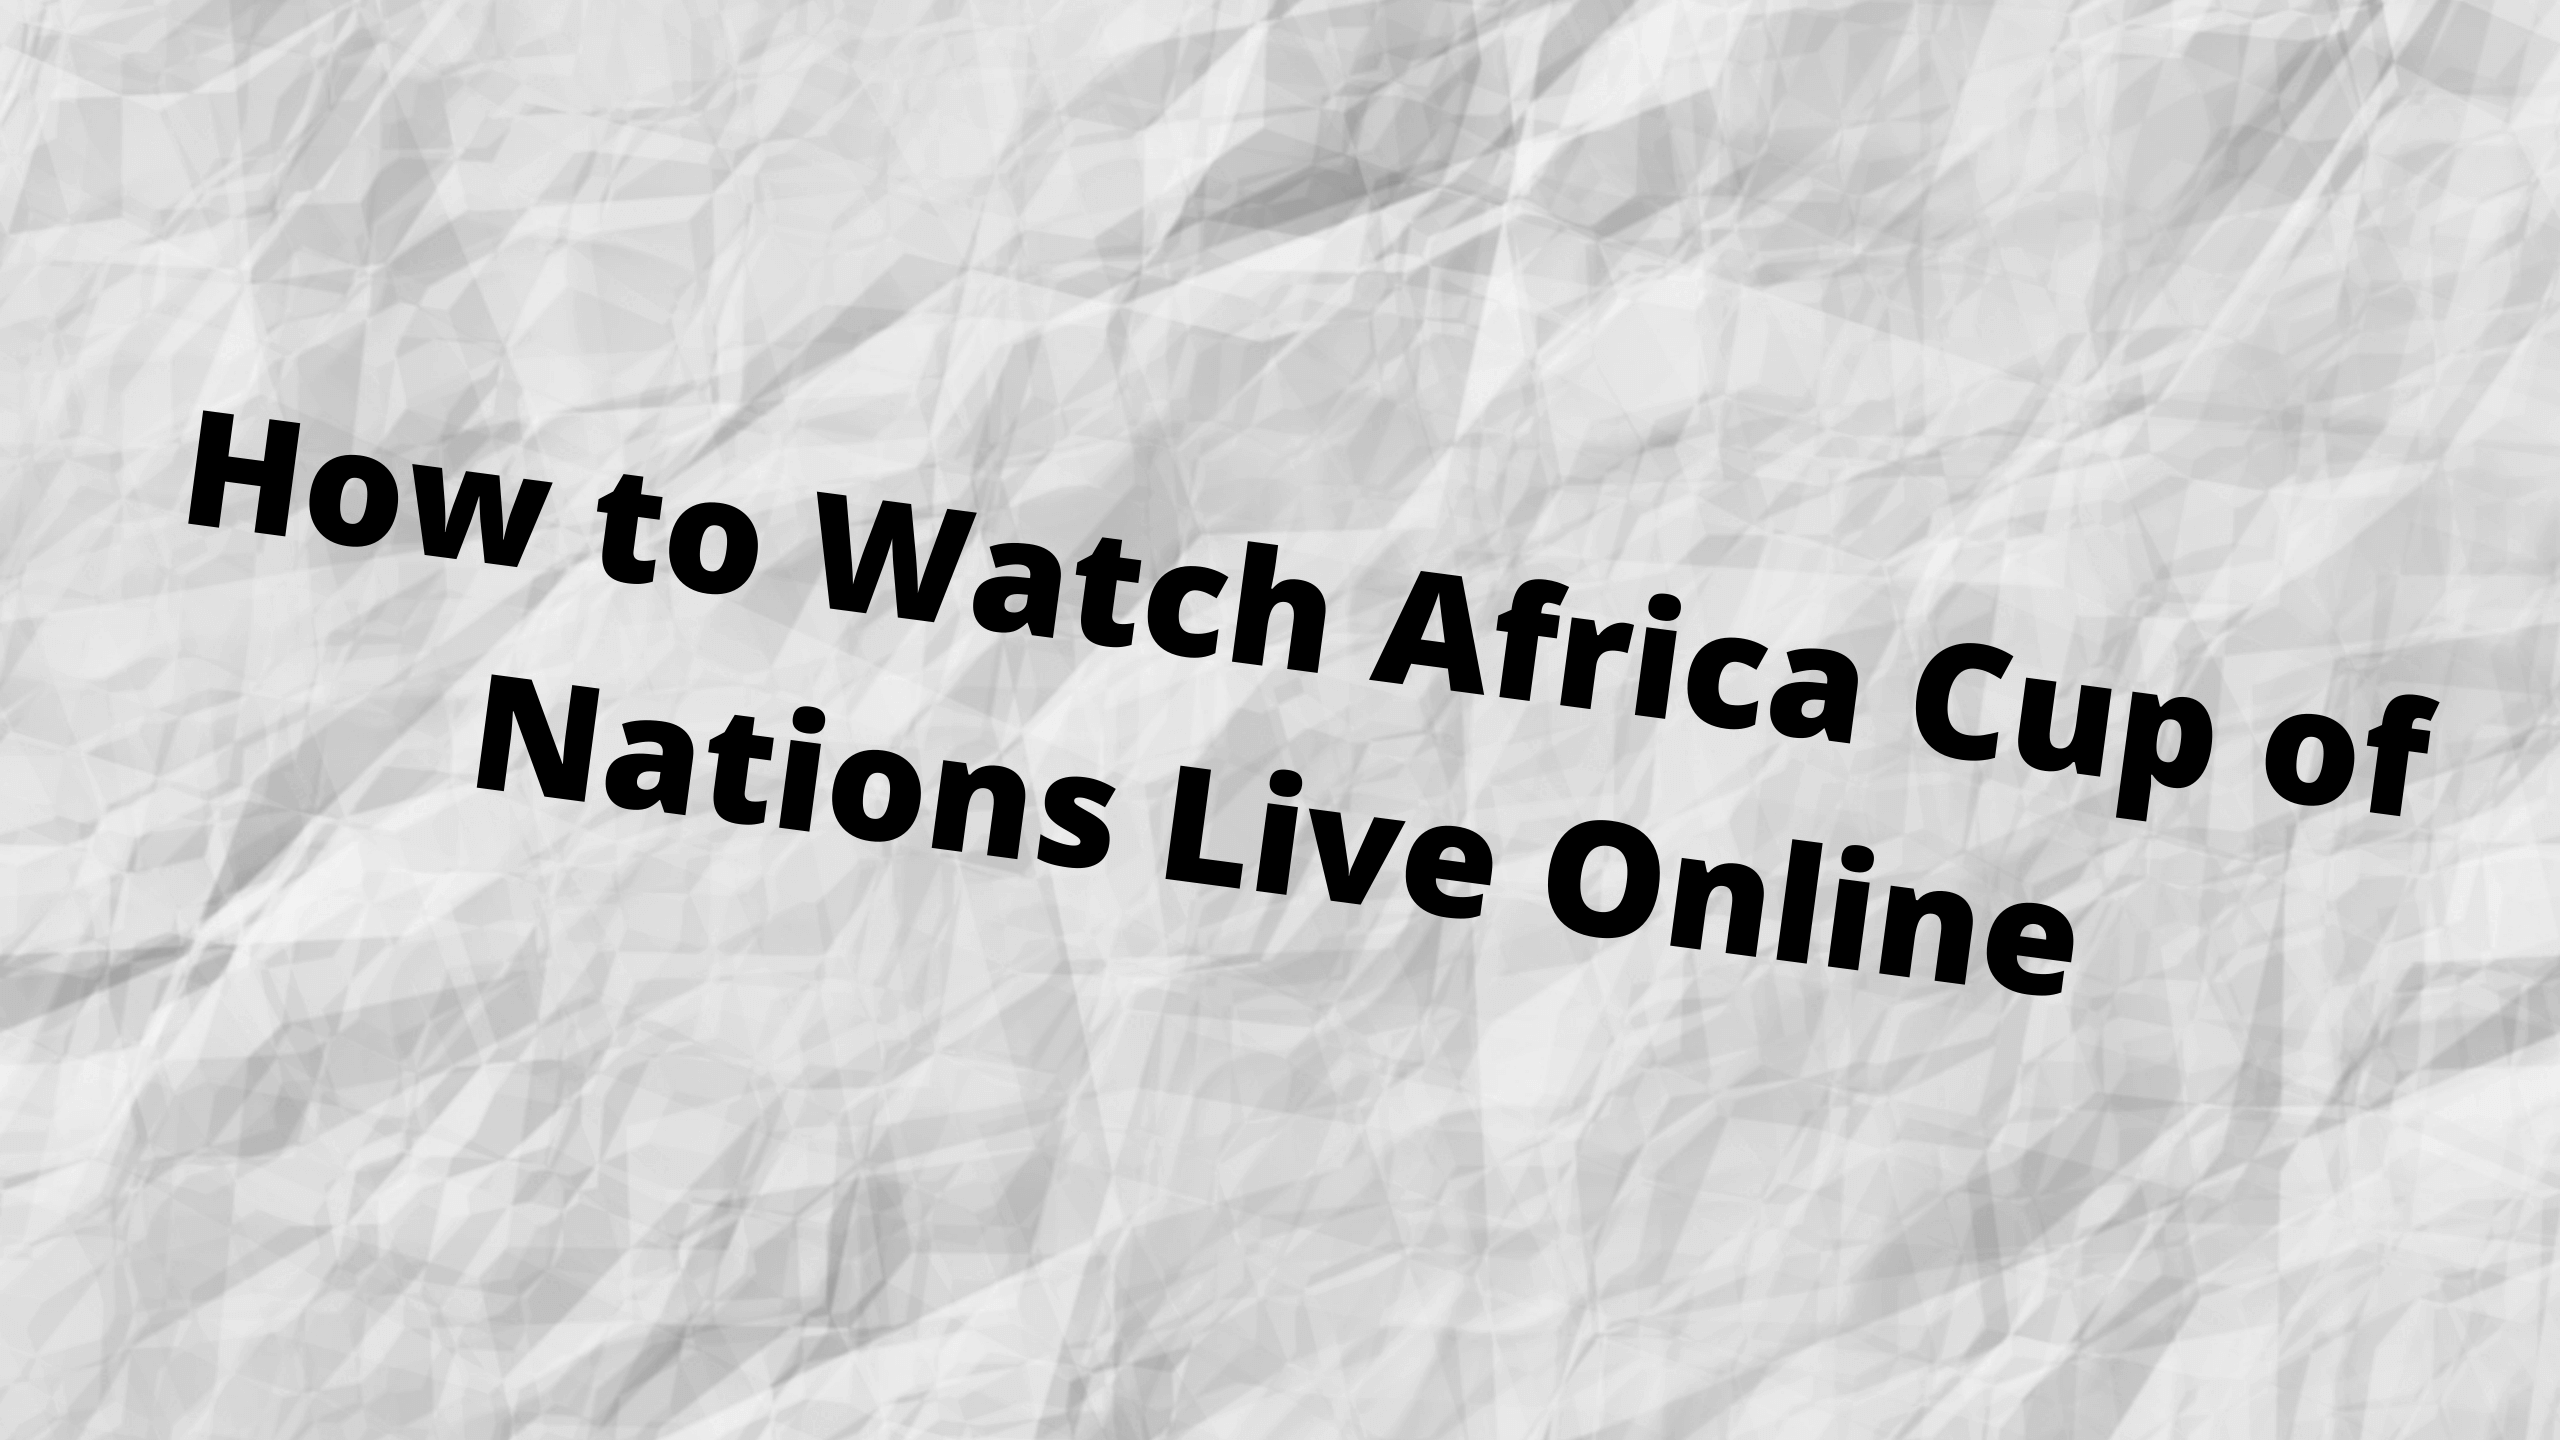 How to Watch Africa Cup of Nations Live Online